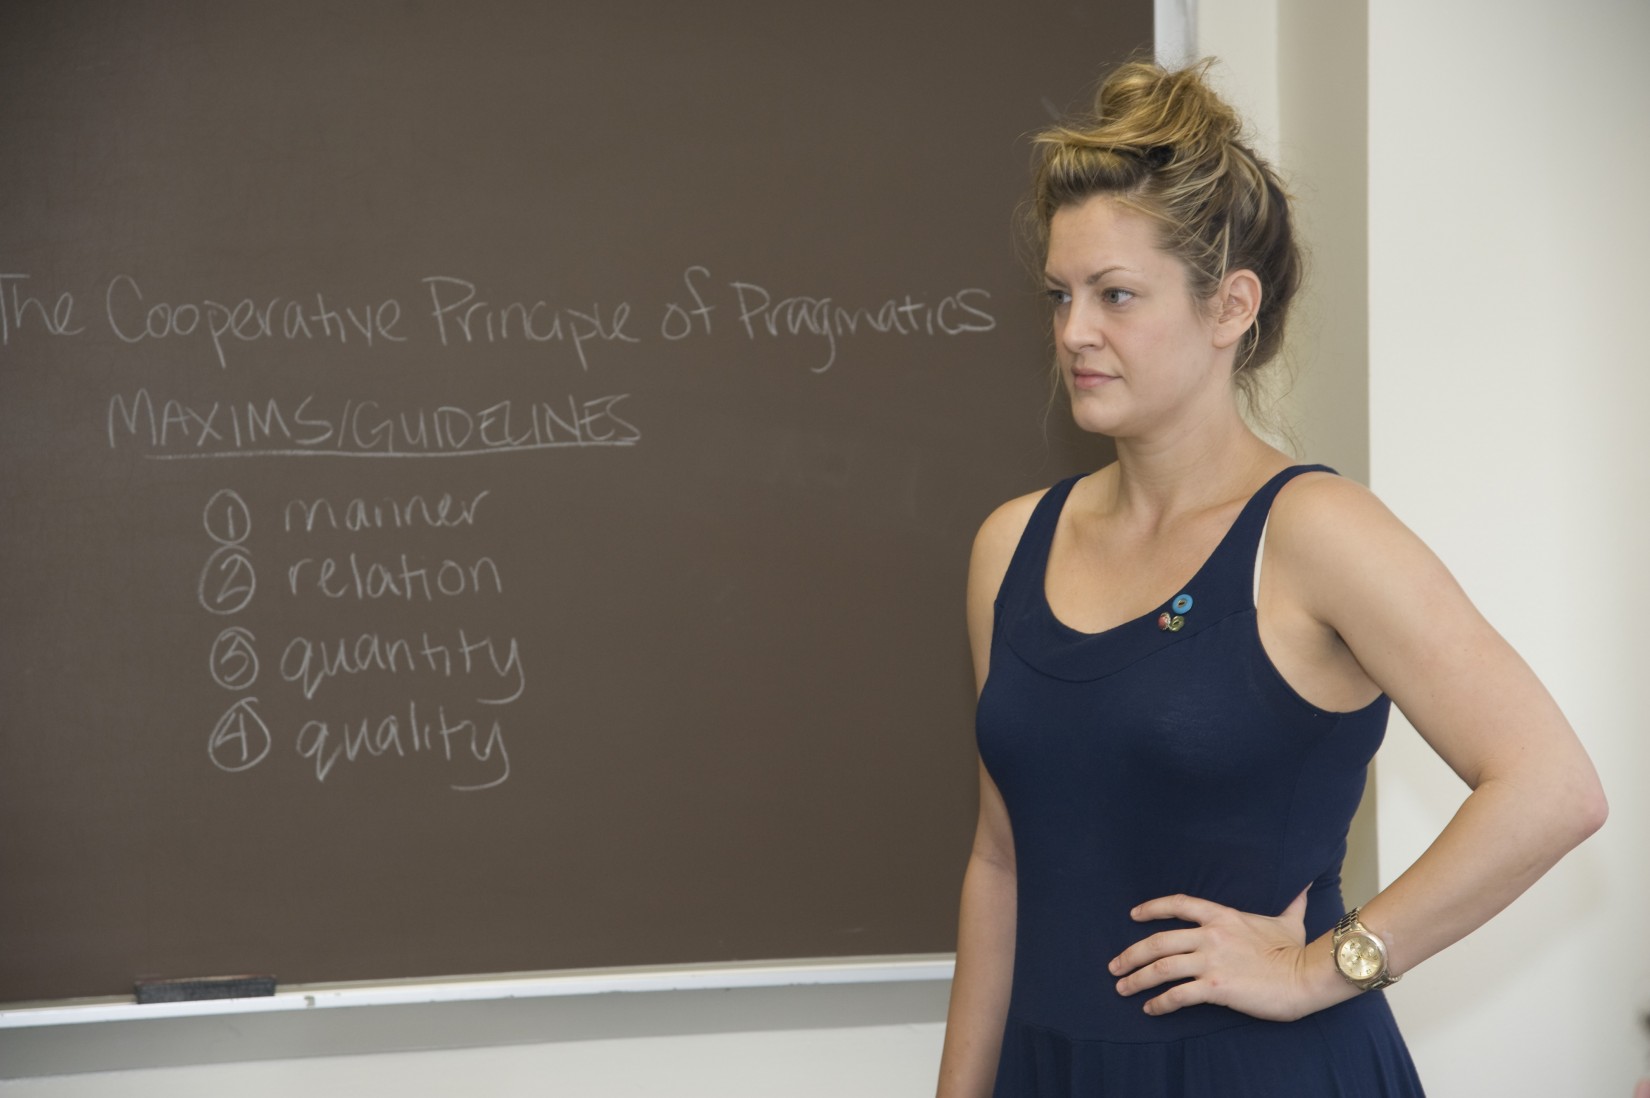 A student writes notes on the board in Prof. Feilla's Detective Narratives summer course